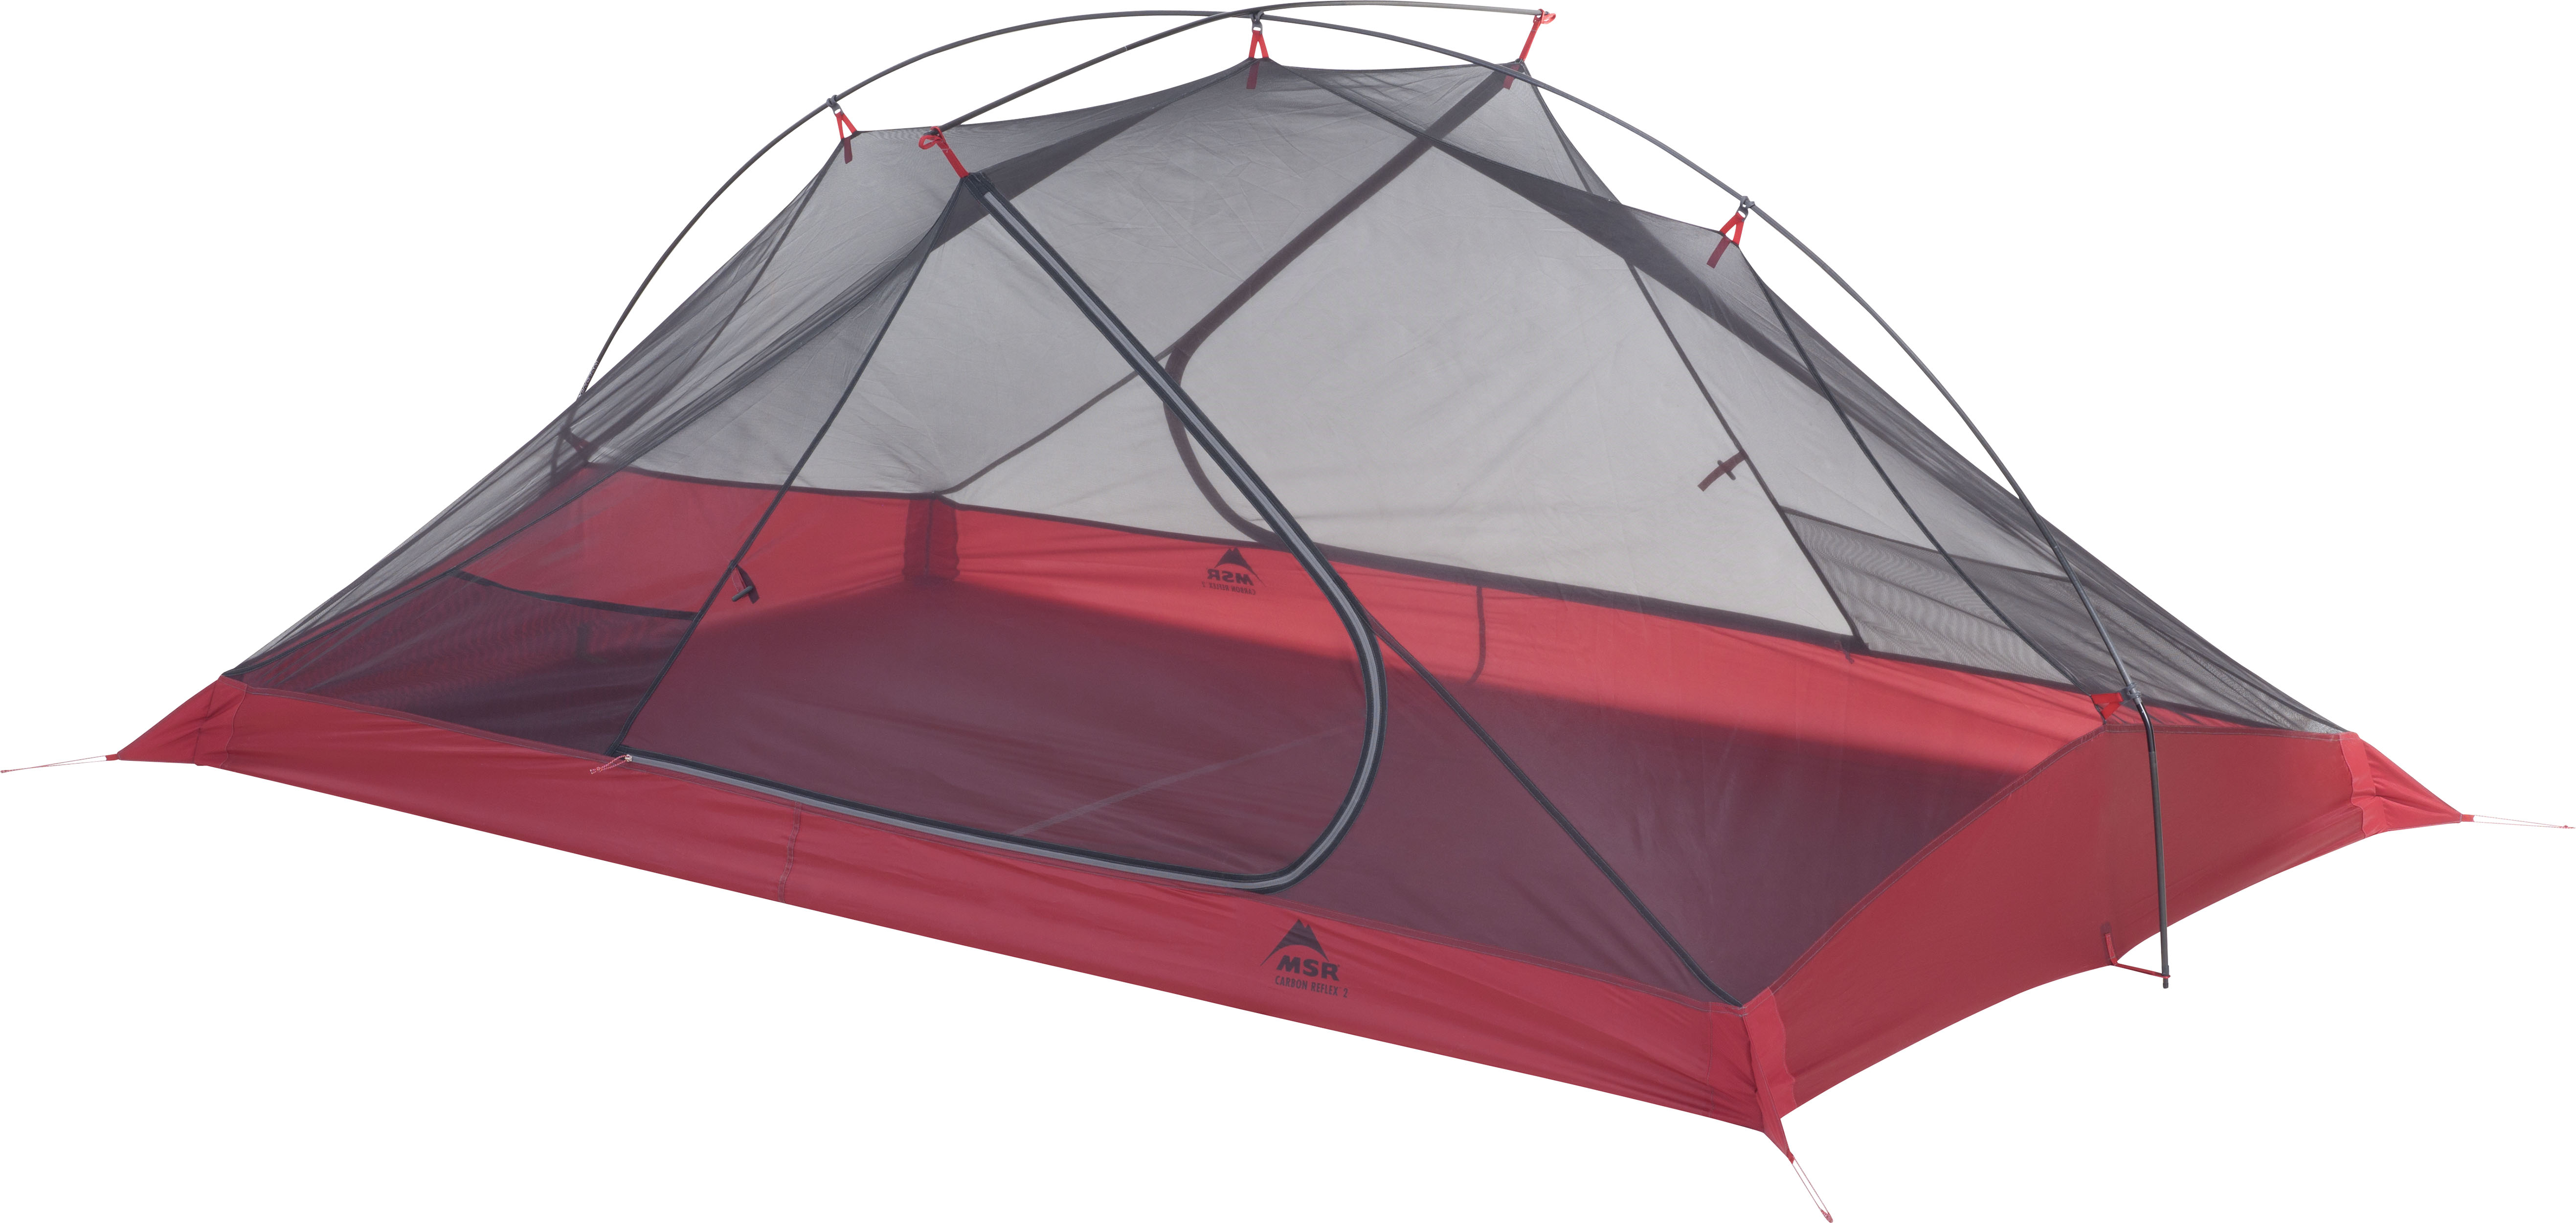 reflex tent carbon tents backpacking lightweight ultralight msr person canopy